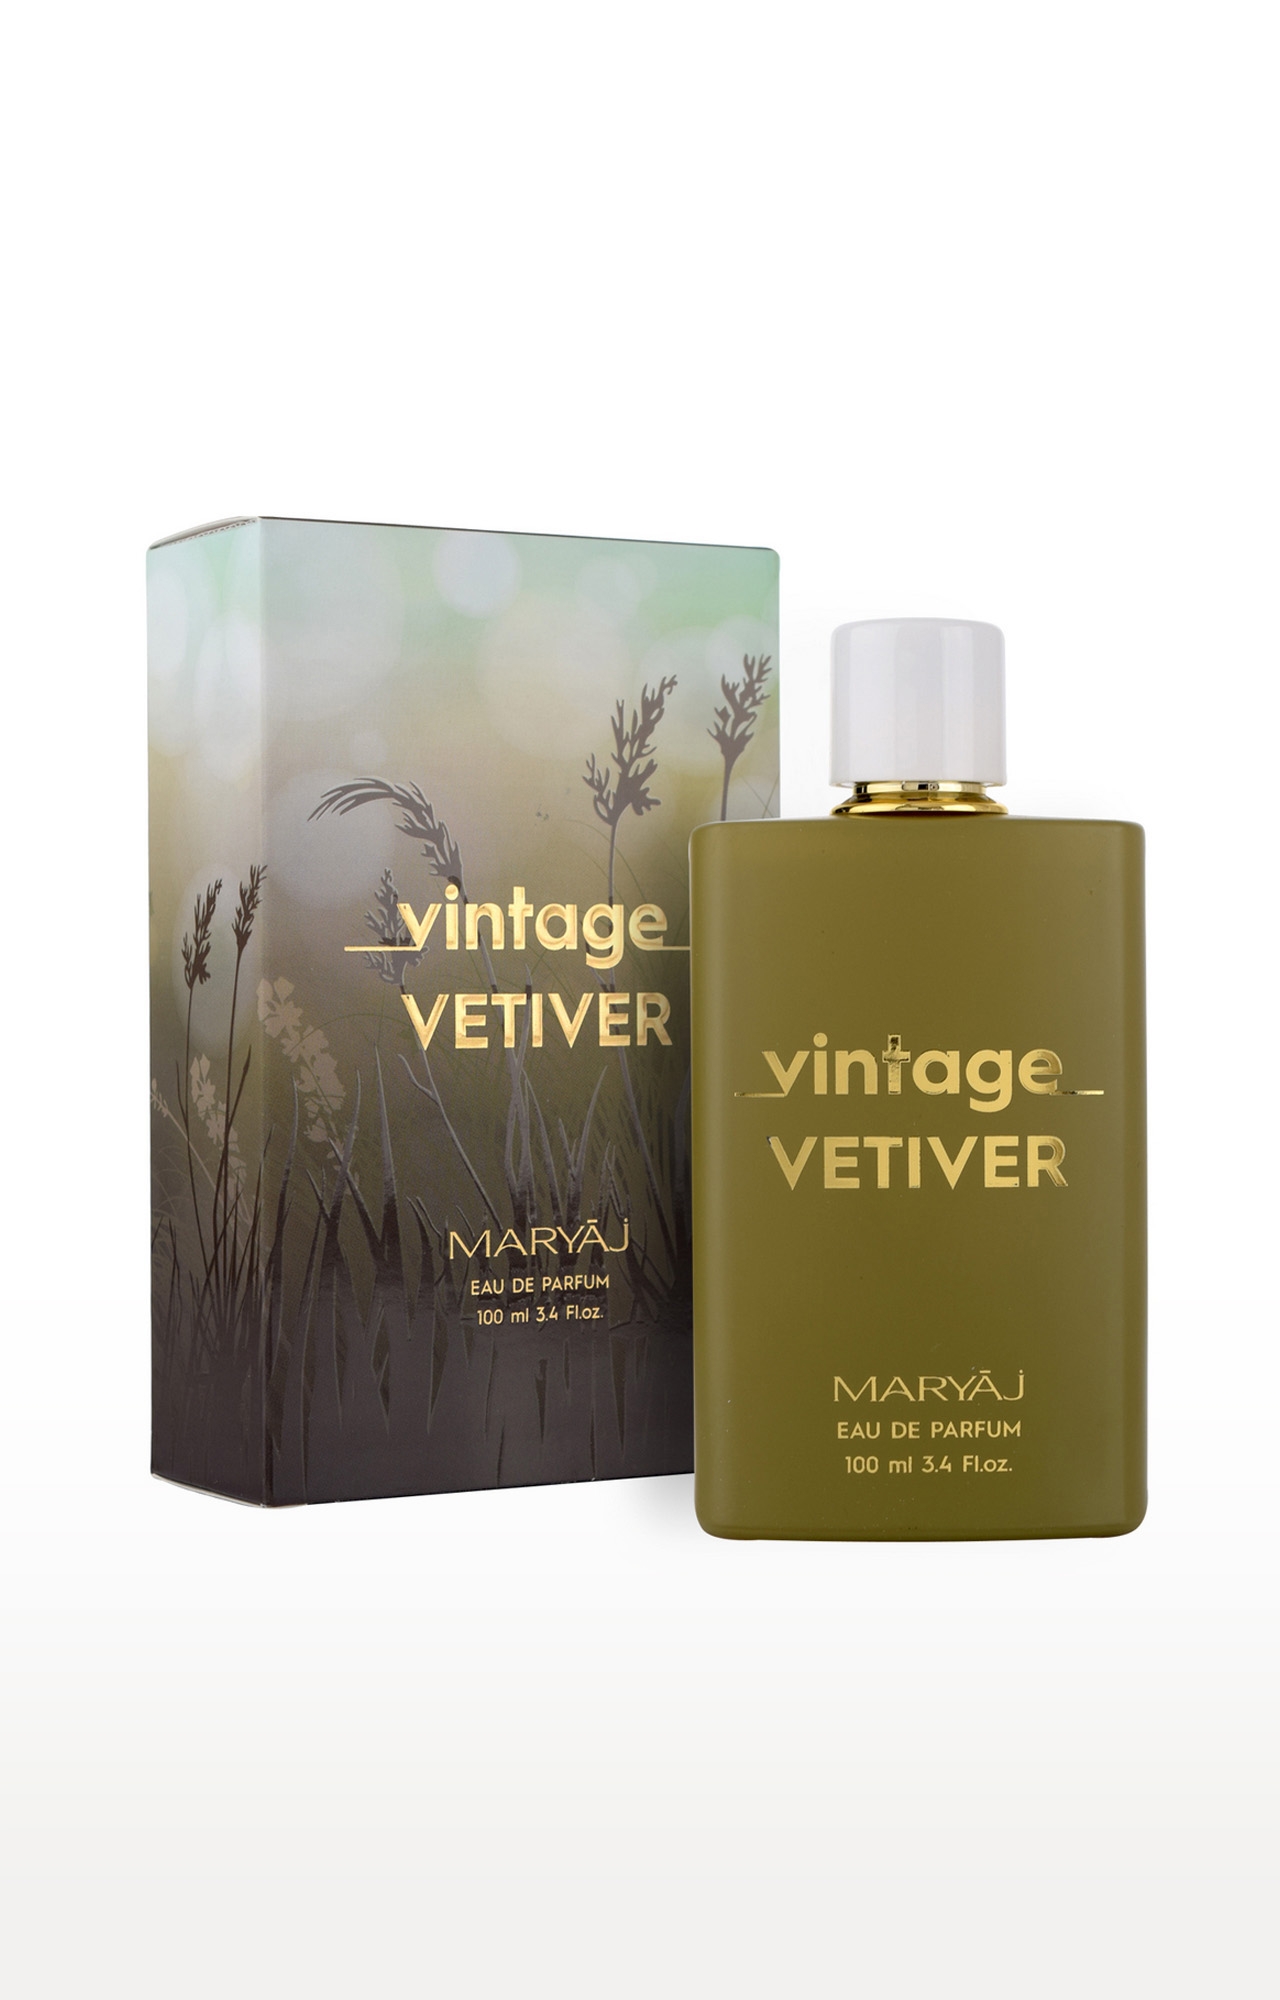 Maryaj Vintage Vetiver Gift for Man and Women Eau De Parfume 100ML Long Lasting Scent Spray Gift for Man and Women